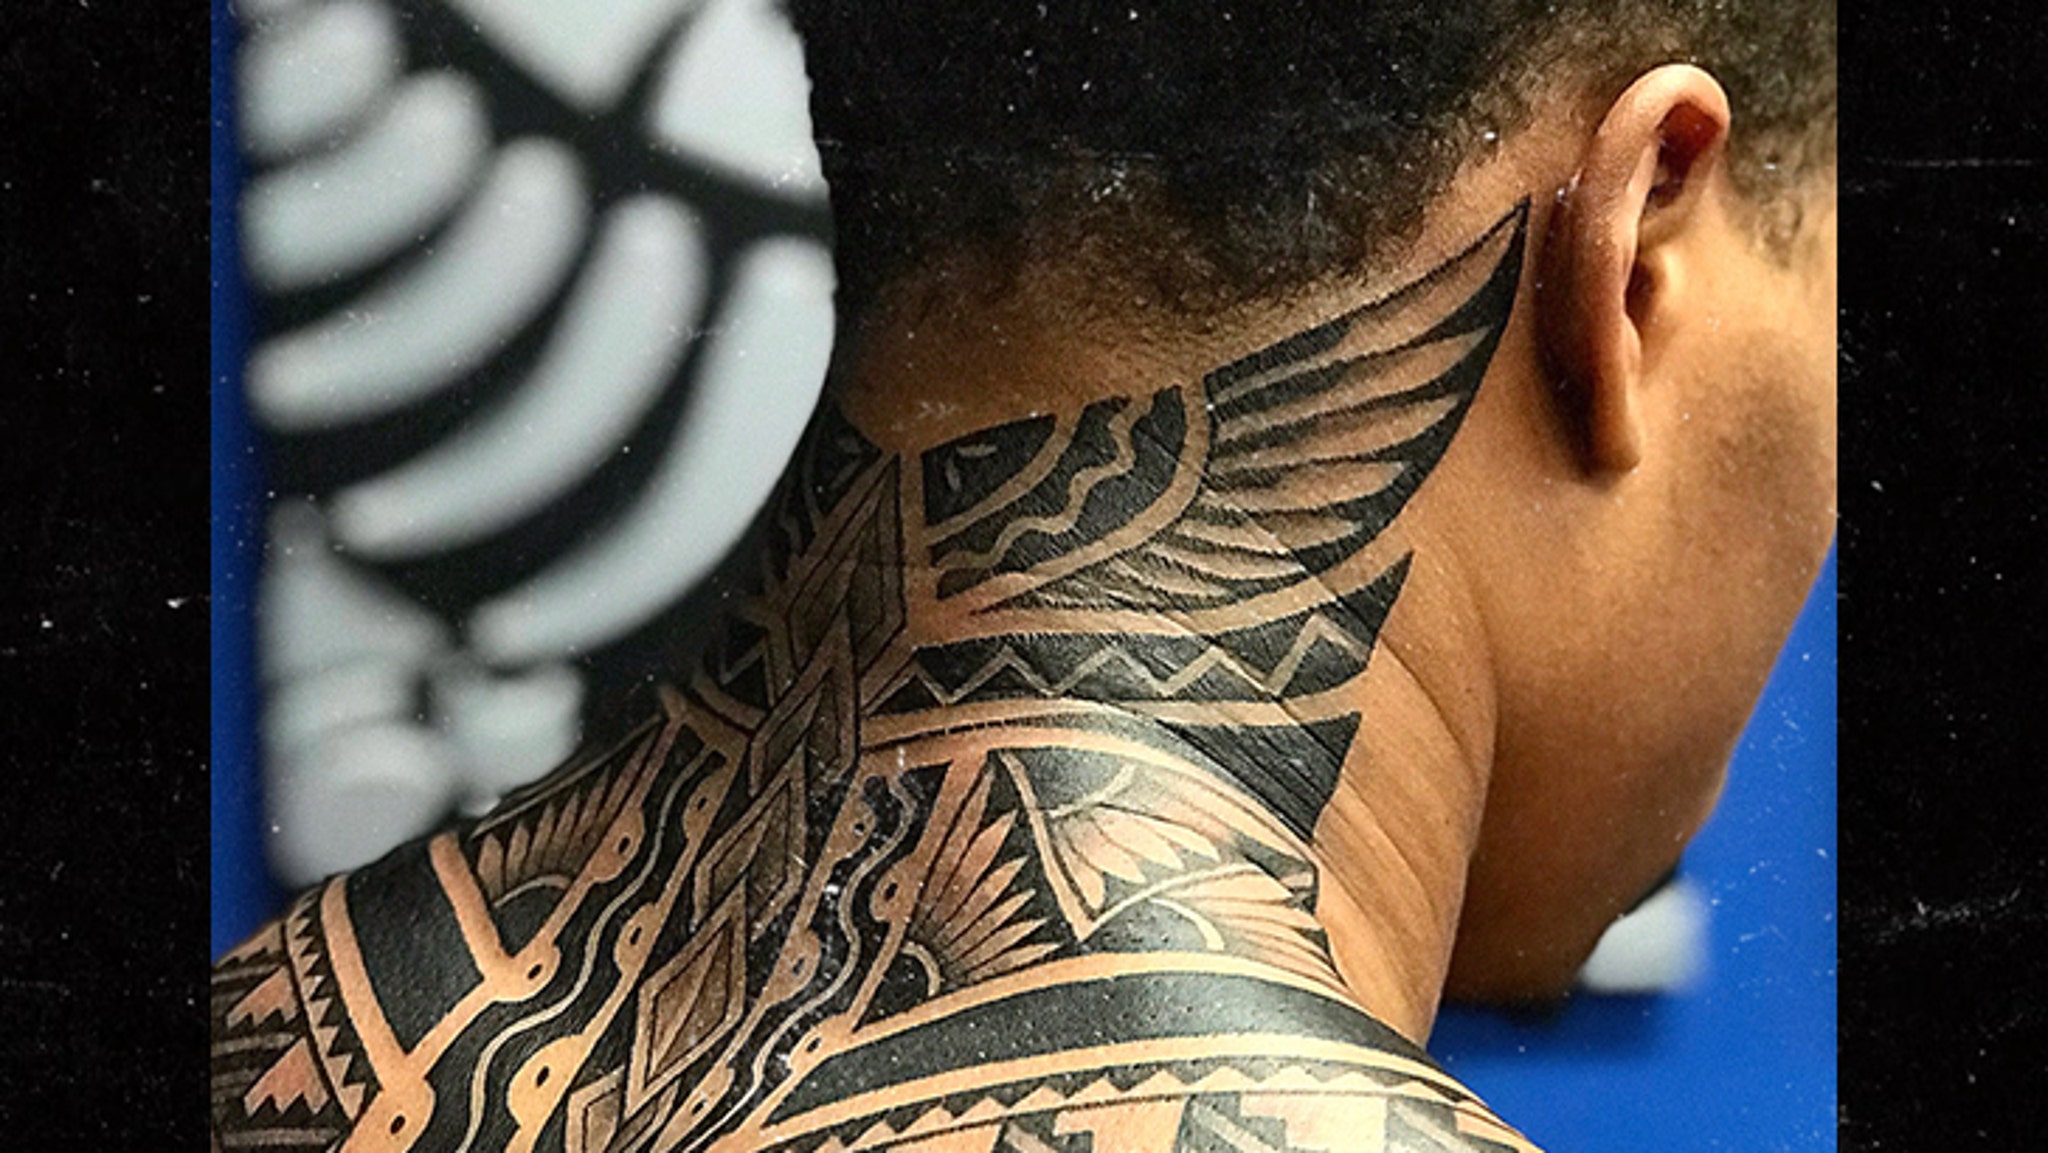 NFL football player comes to Orland for tattoos | Glenn County Transcript |  appeal-democrat.com